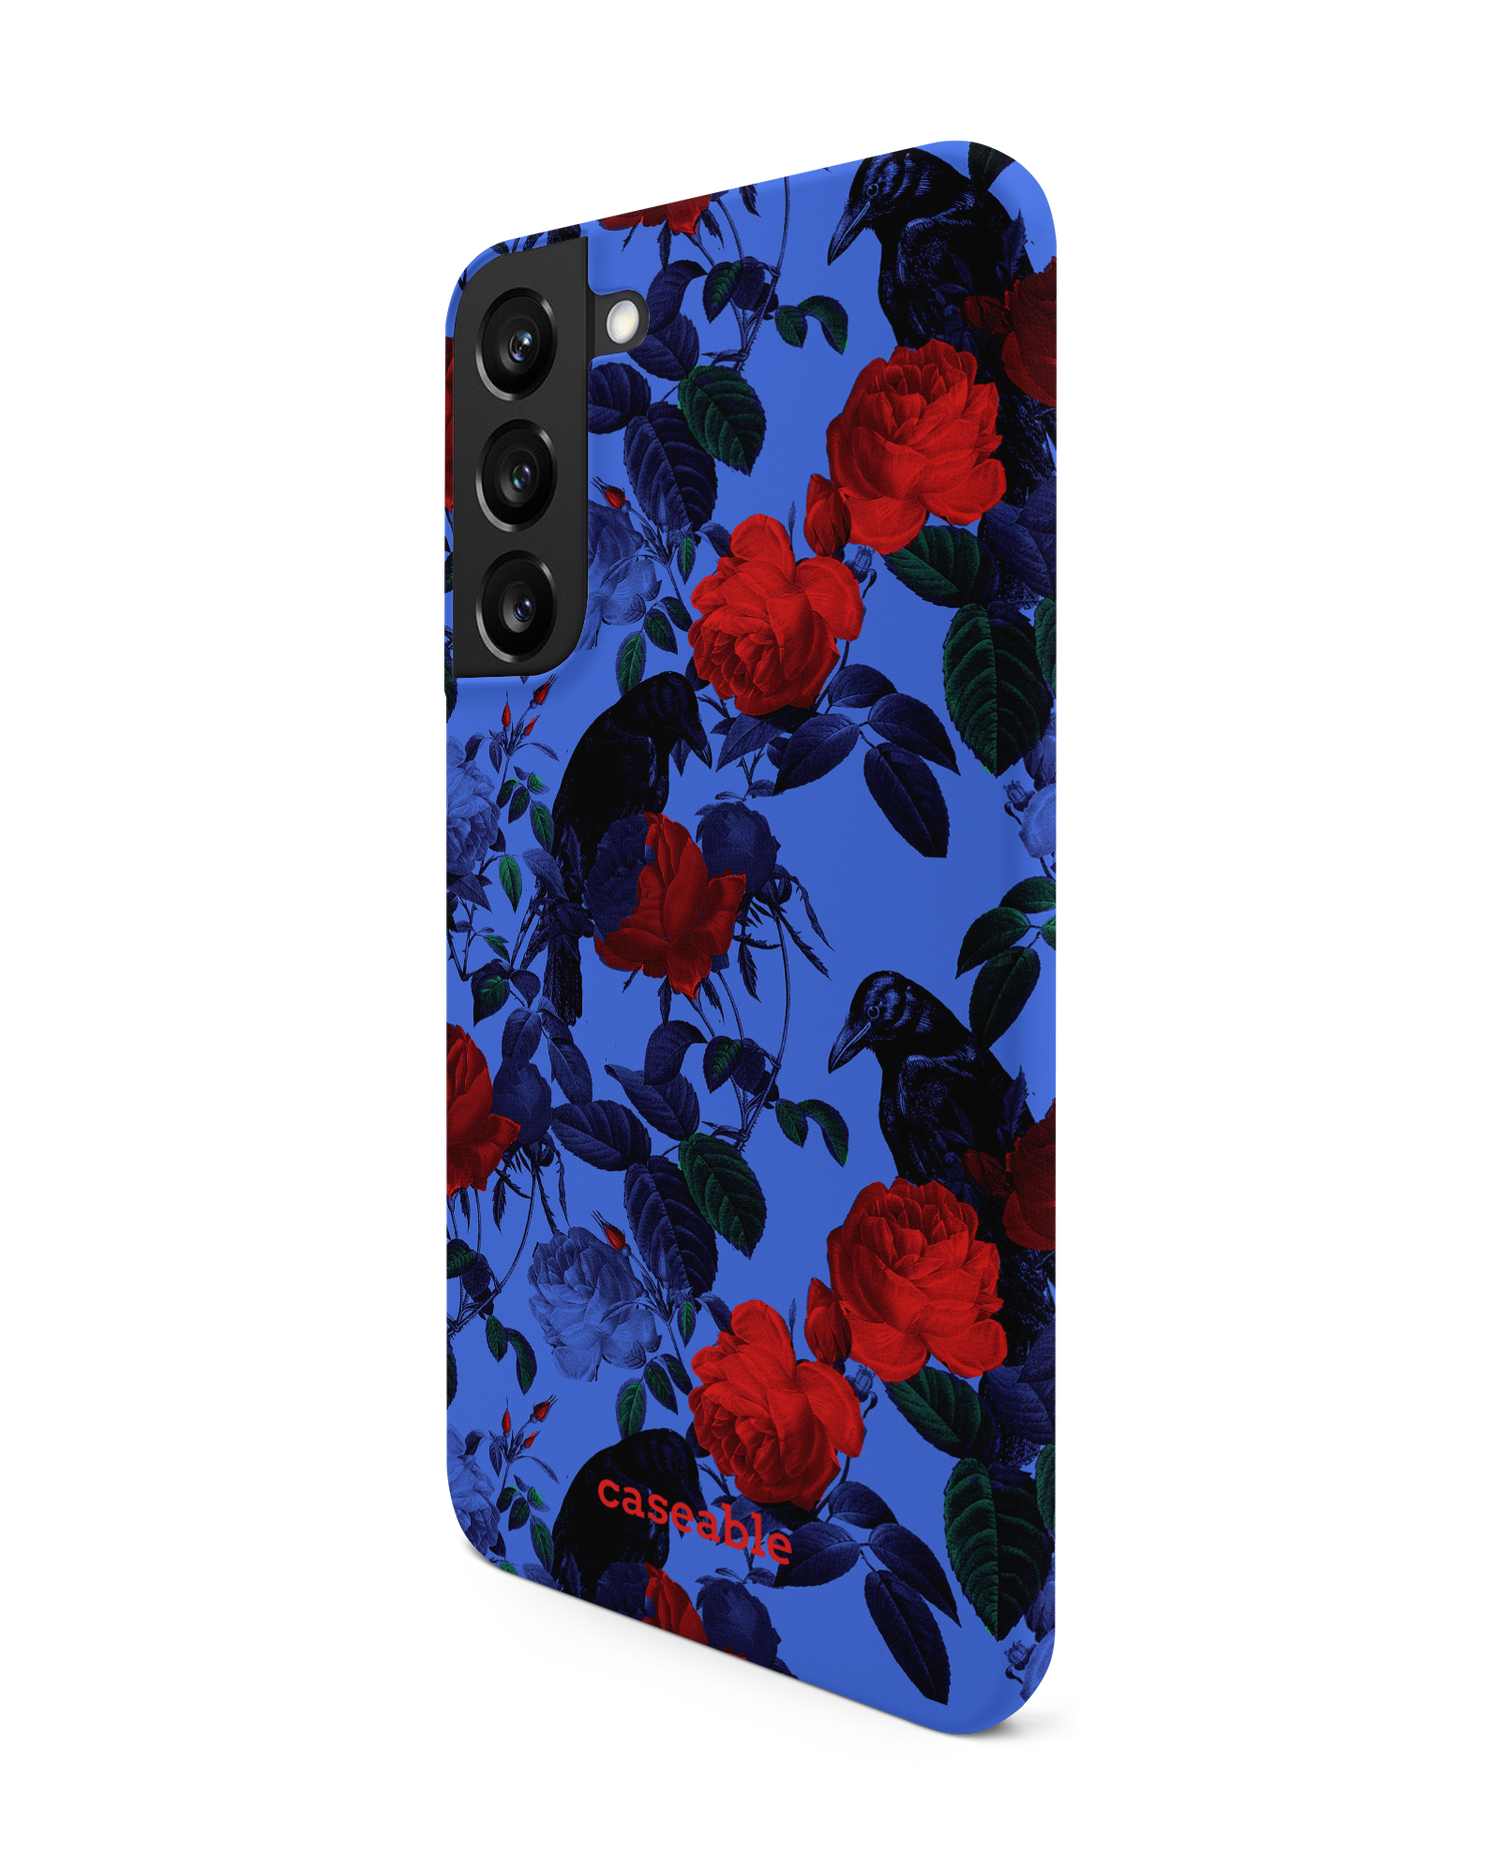 Roses And Ravens Hard Shell Phone Case Samsung Galaxy S22 Plus 5G: View from the right side